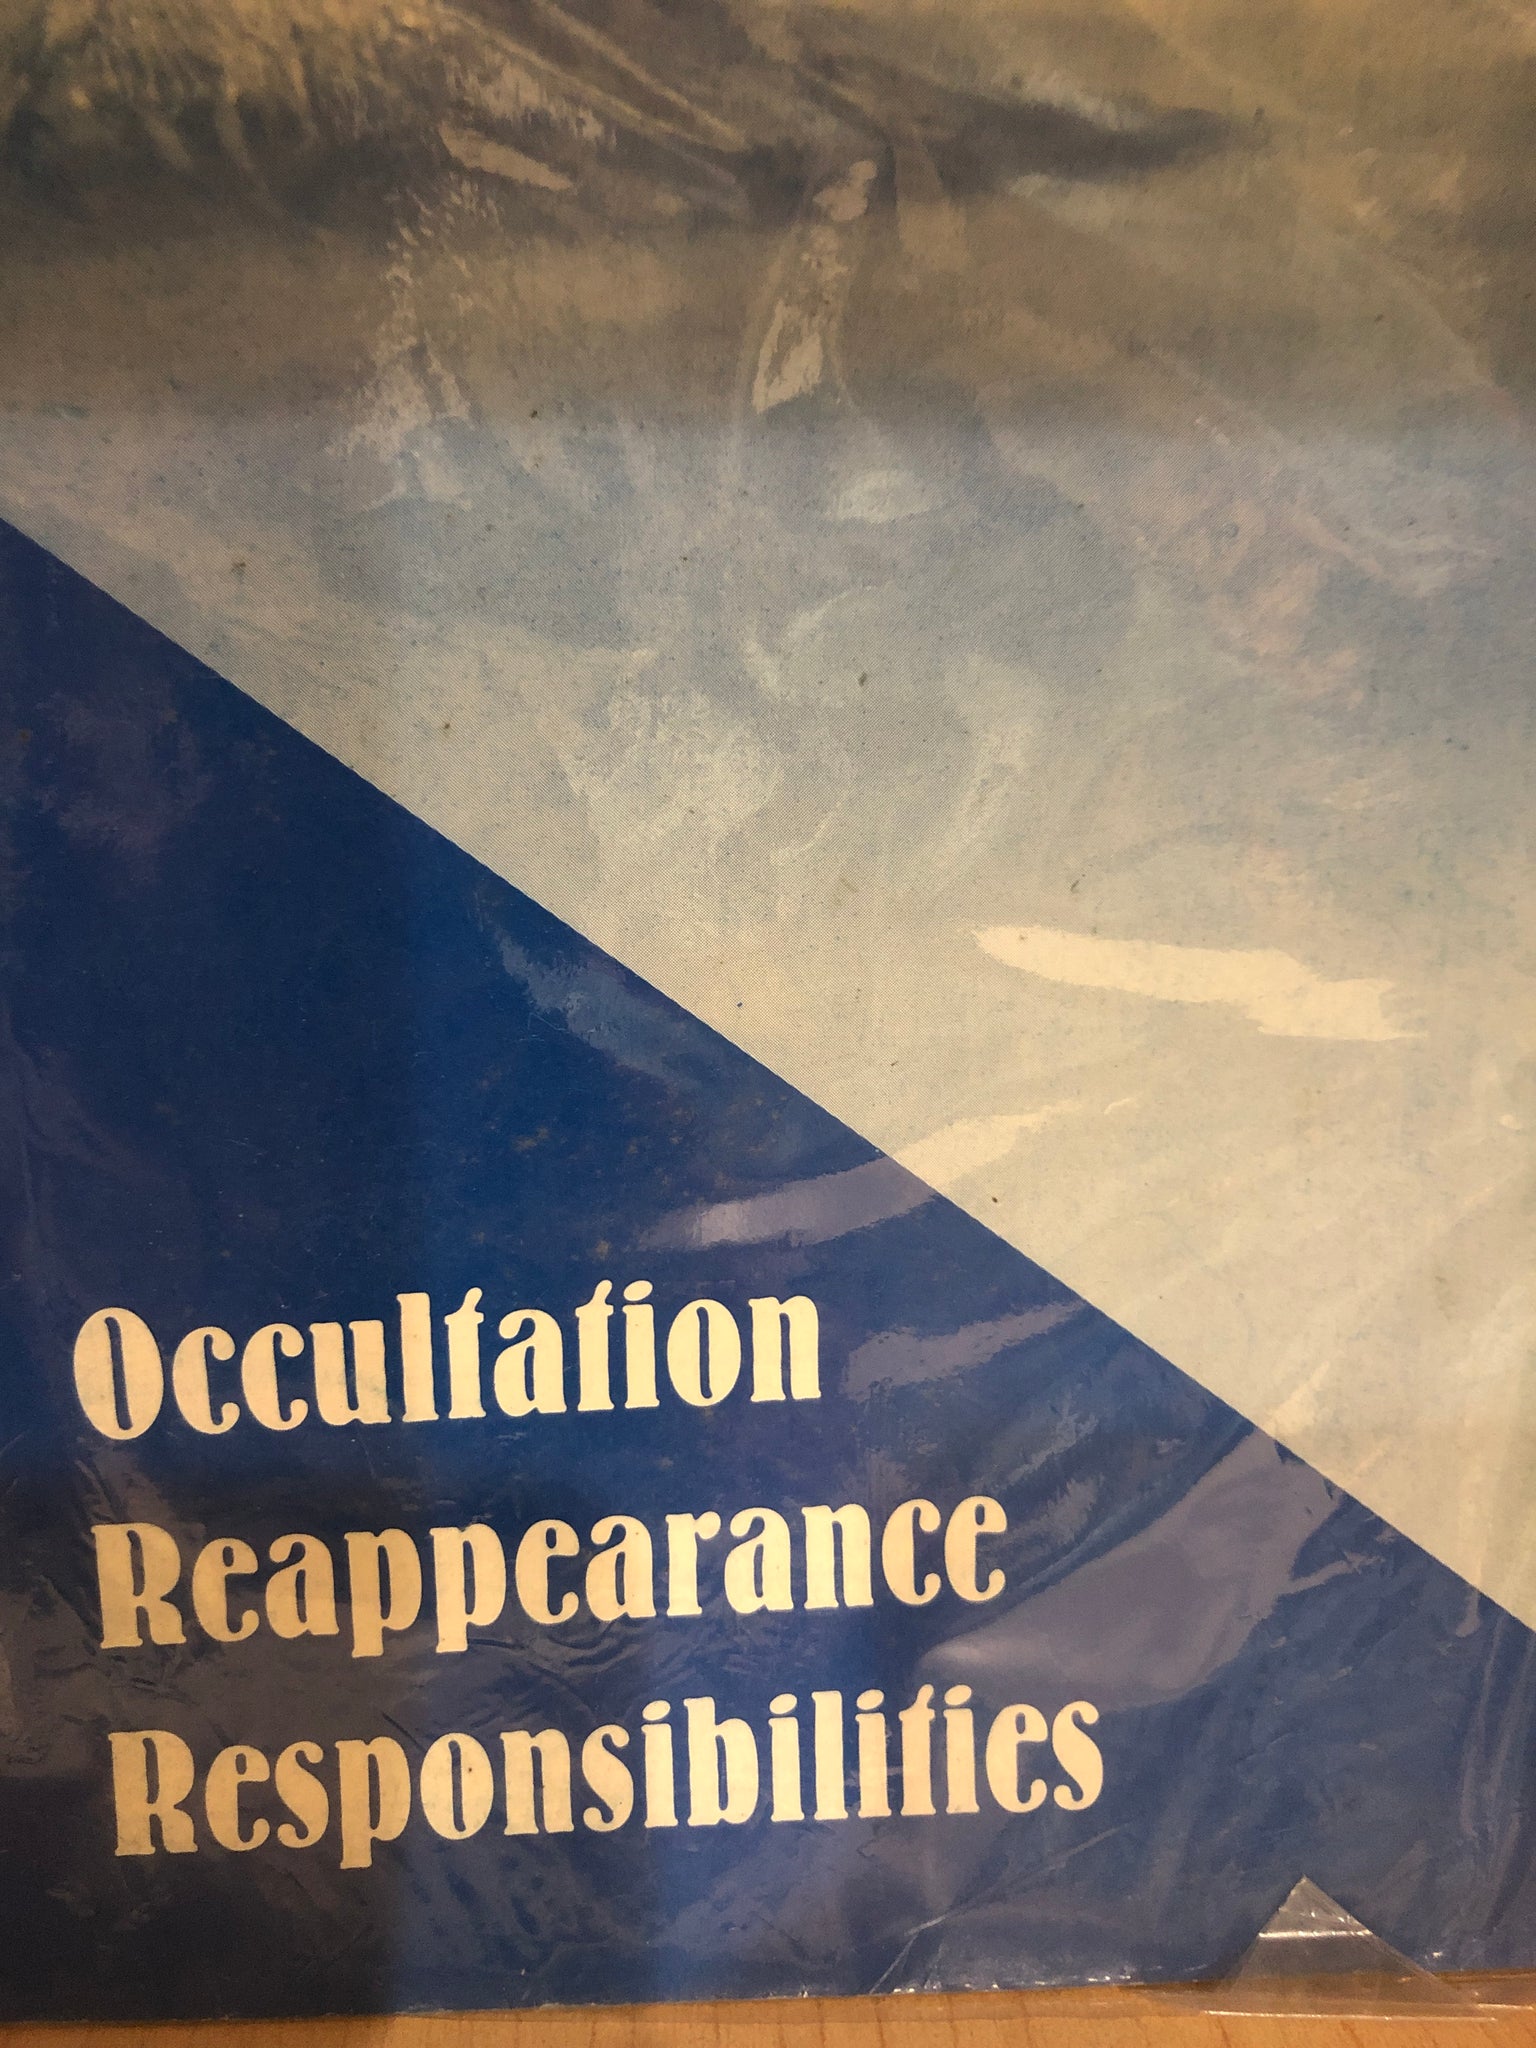 Occultation Reappearance Responsibilities